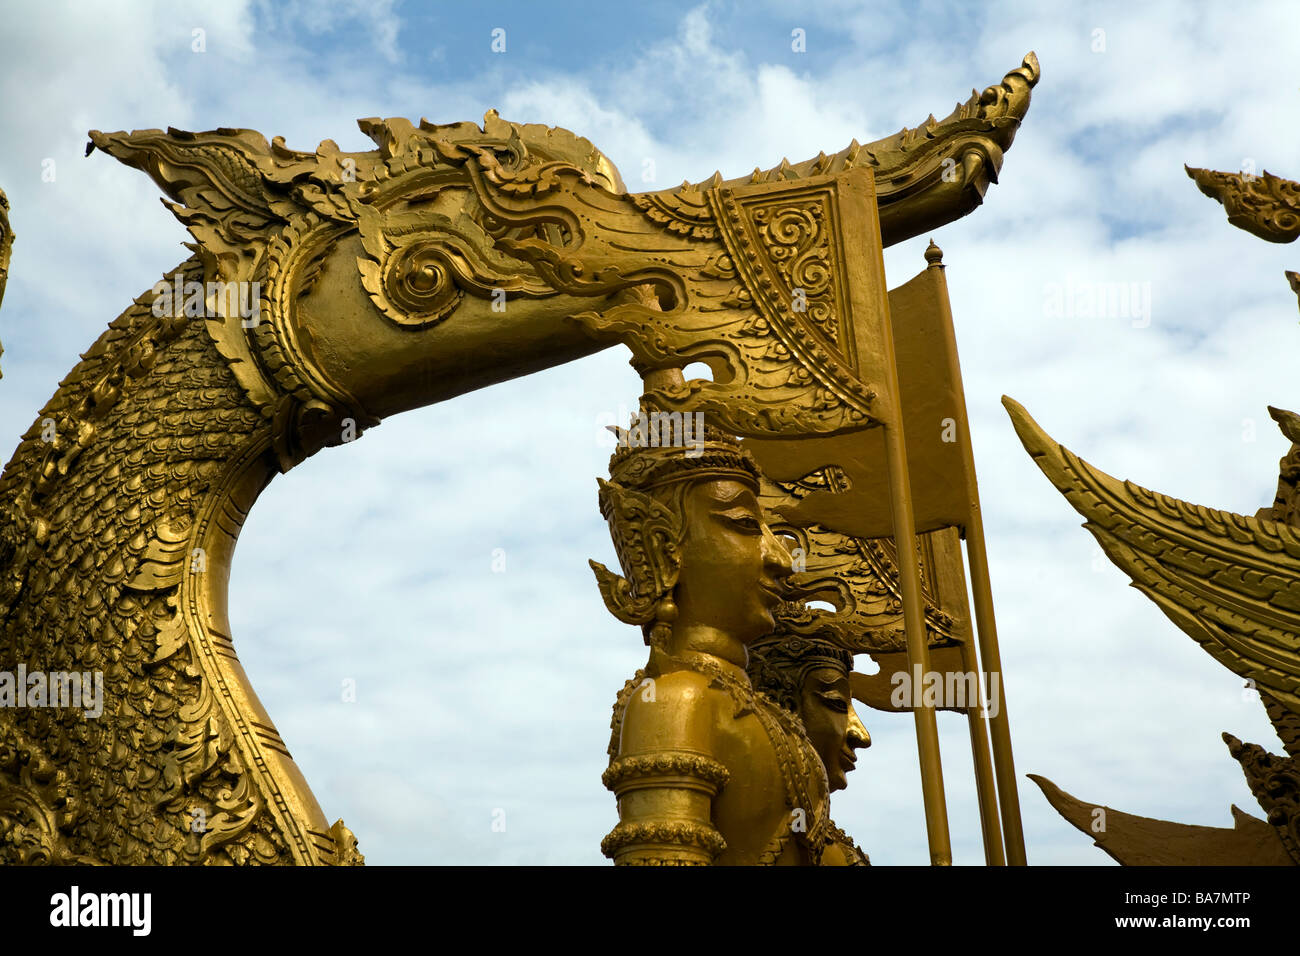 Candle Sculpture of honor to His Majesty the King-Thung Si Muang Park Giant Candle or Merit Sculpture, Ubon Ratchathani Thailand Stock Photo